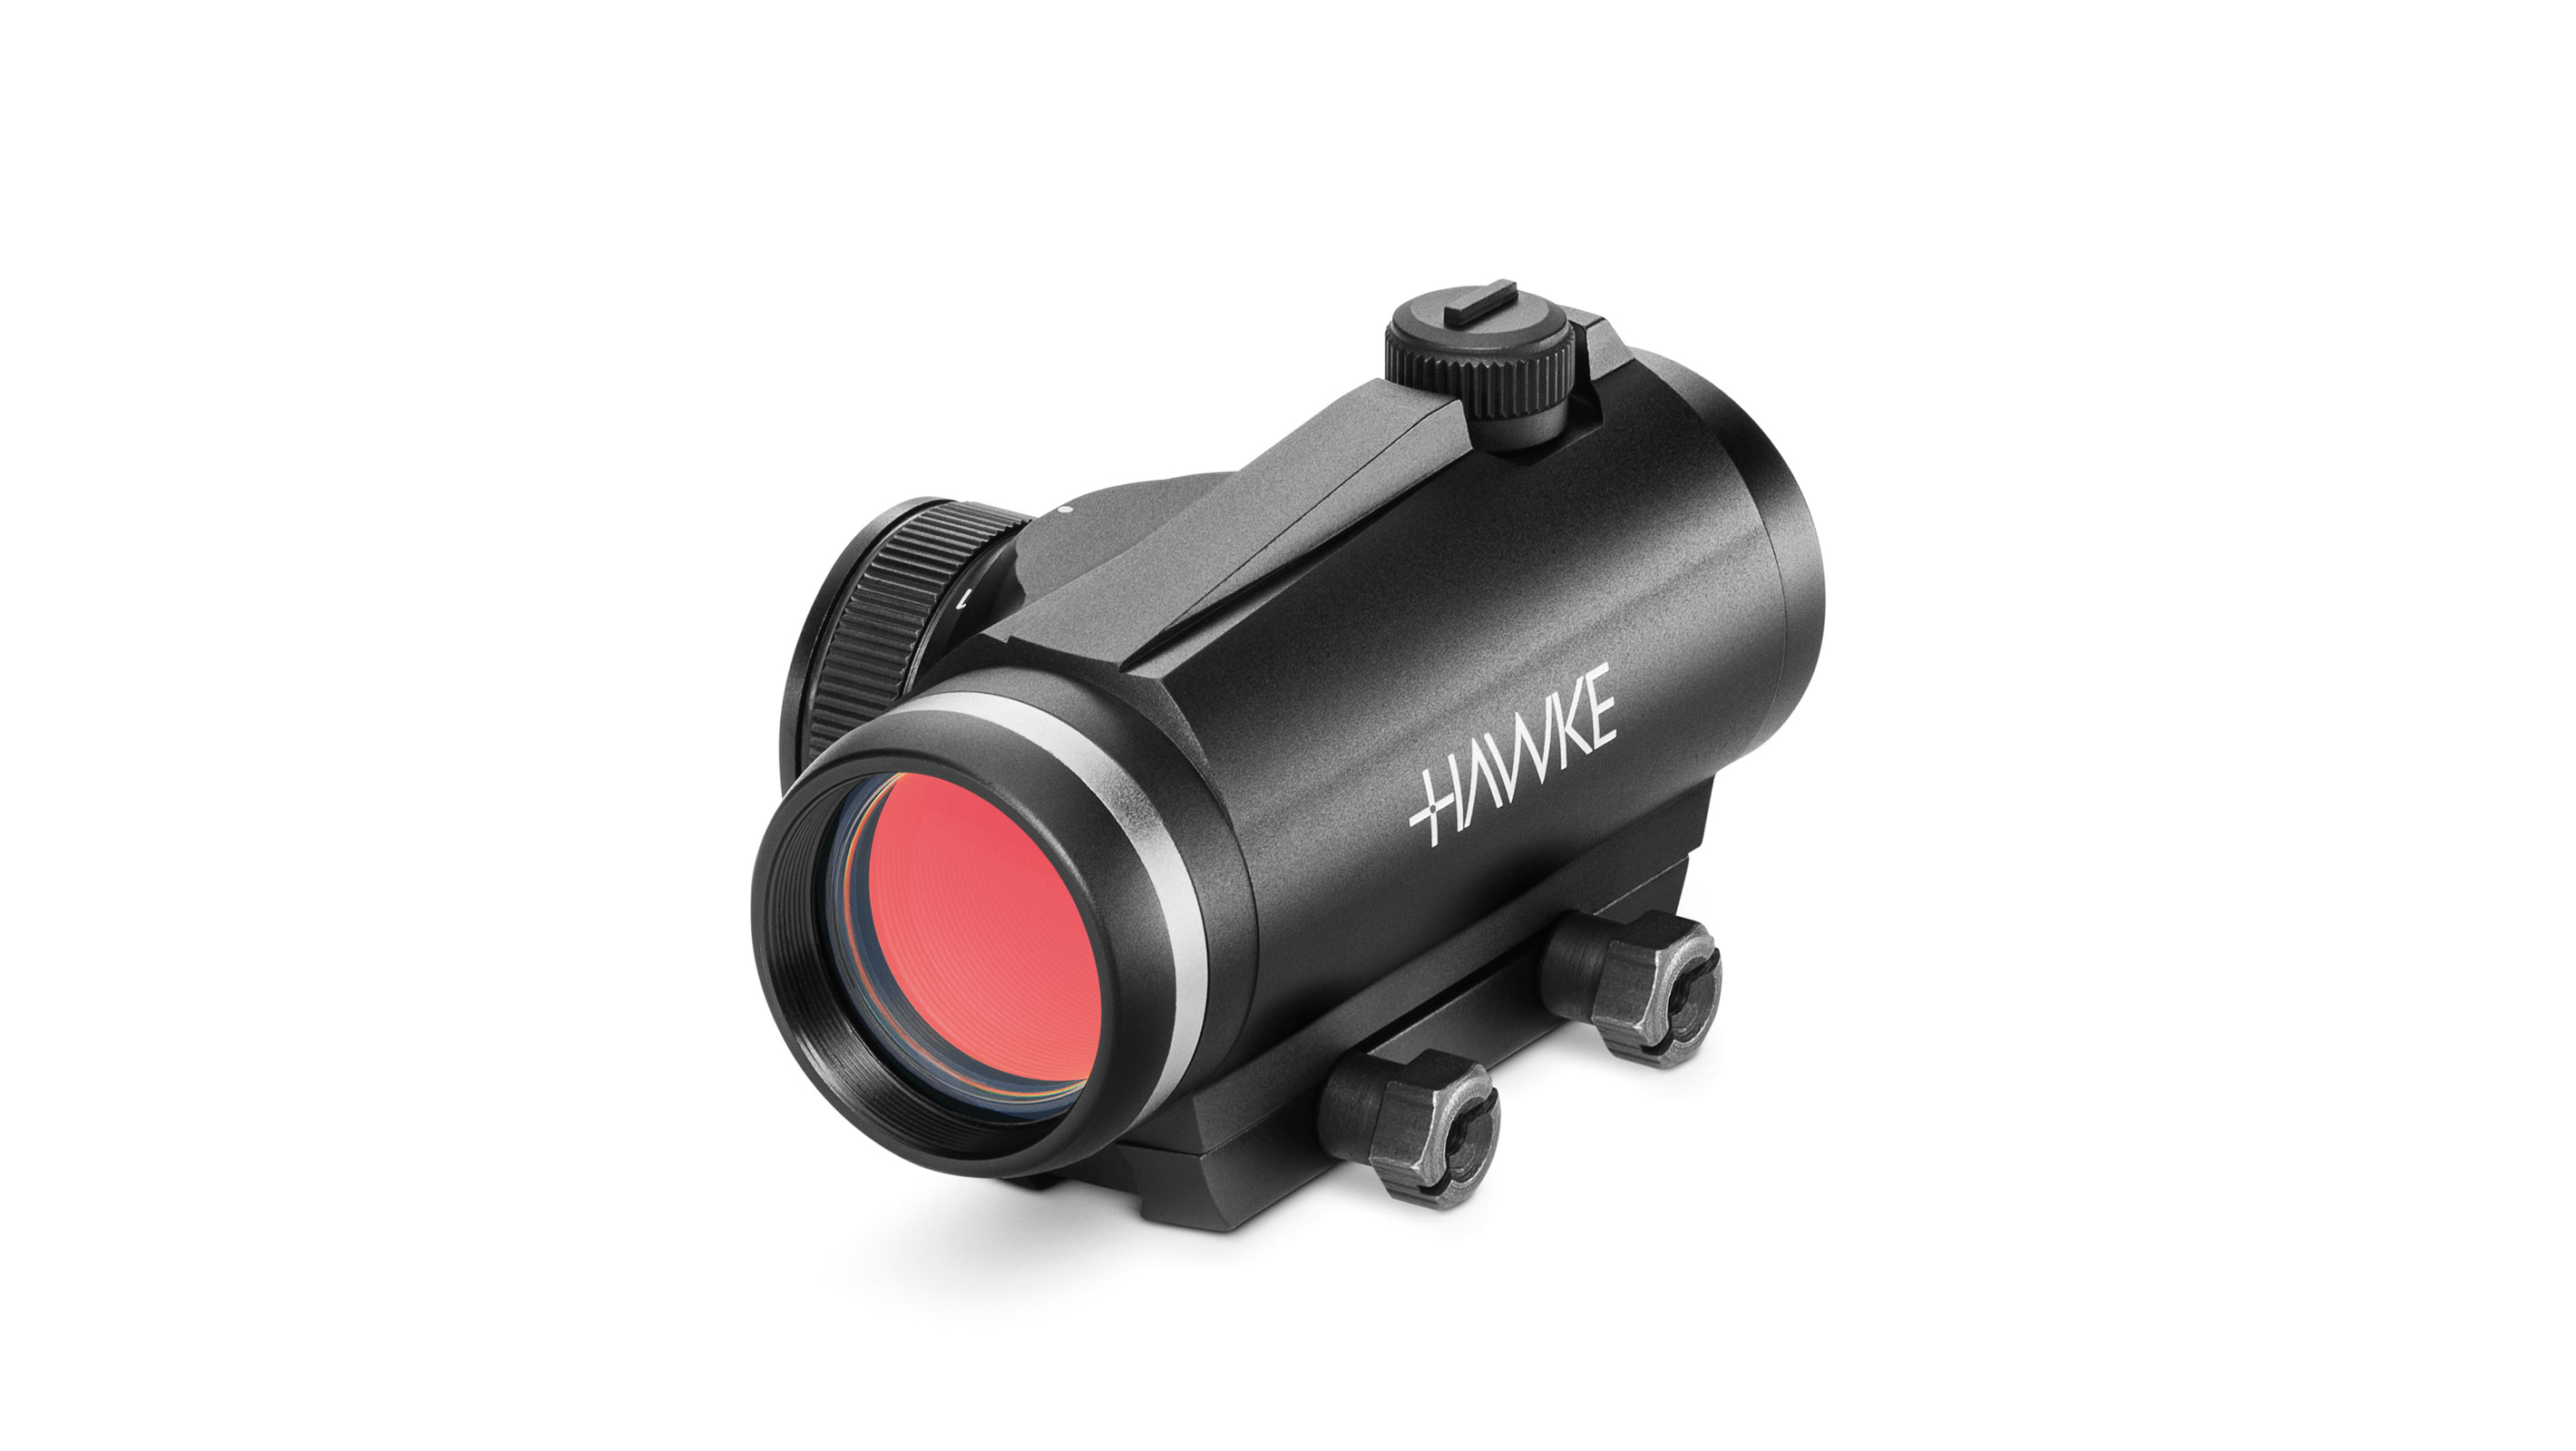 Objective End View of The Hawke Vantage Red Dot 1x25 With Integrated Dovetail Mounts